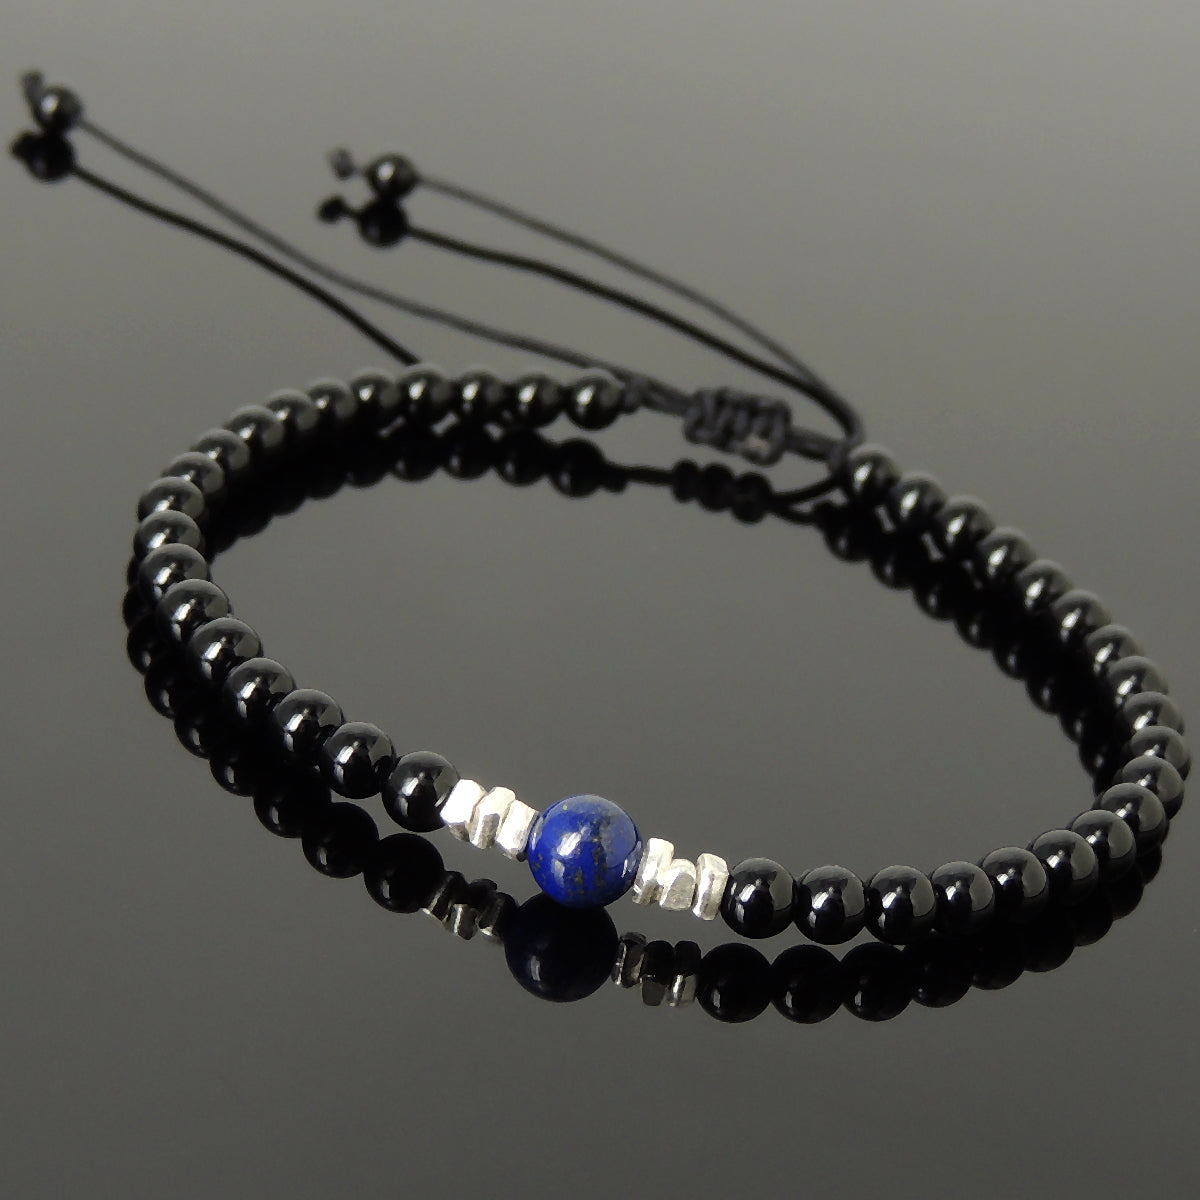 Lapis Lazuli & Bright Black Onyx Adjustable Braided Bracelet with S925 Sterling Silver Nugget Beads - Handmade by Gem & Silver BR1198